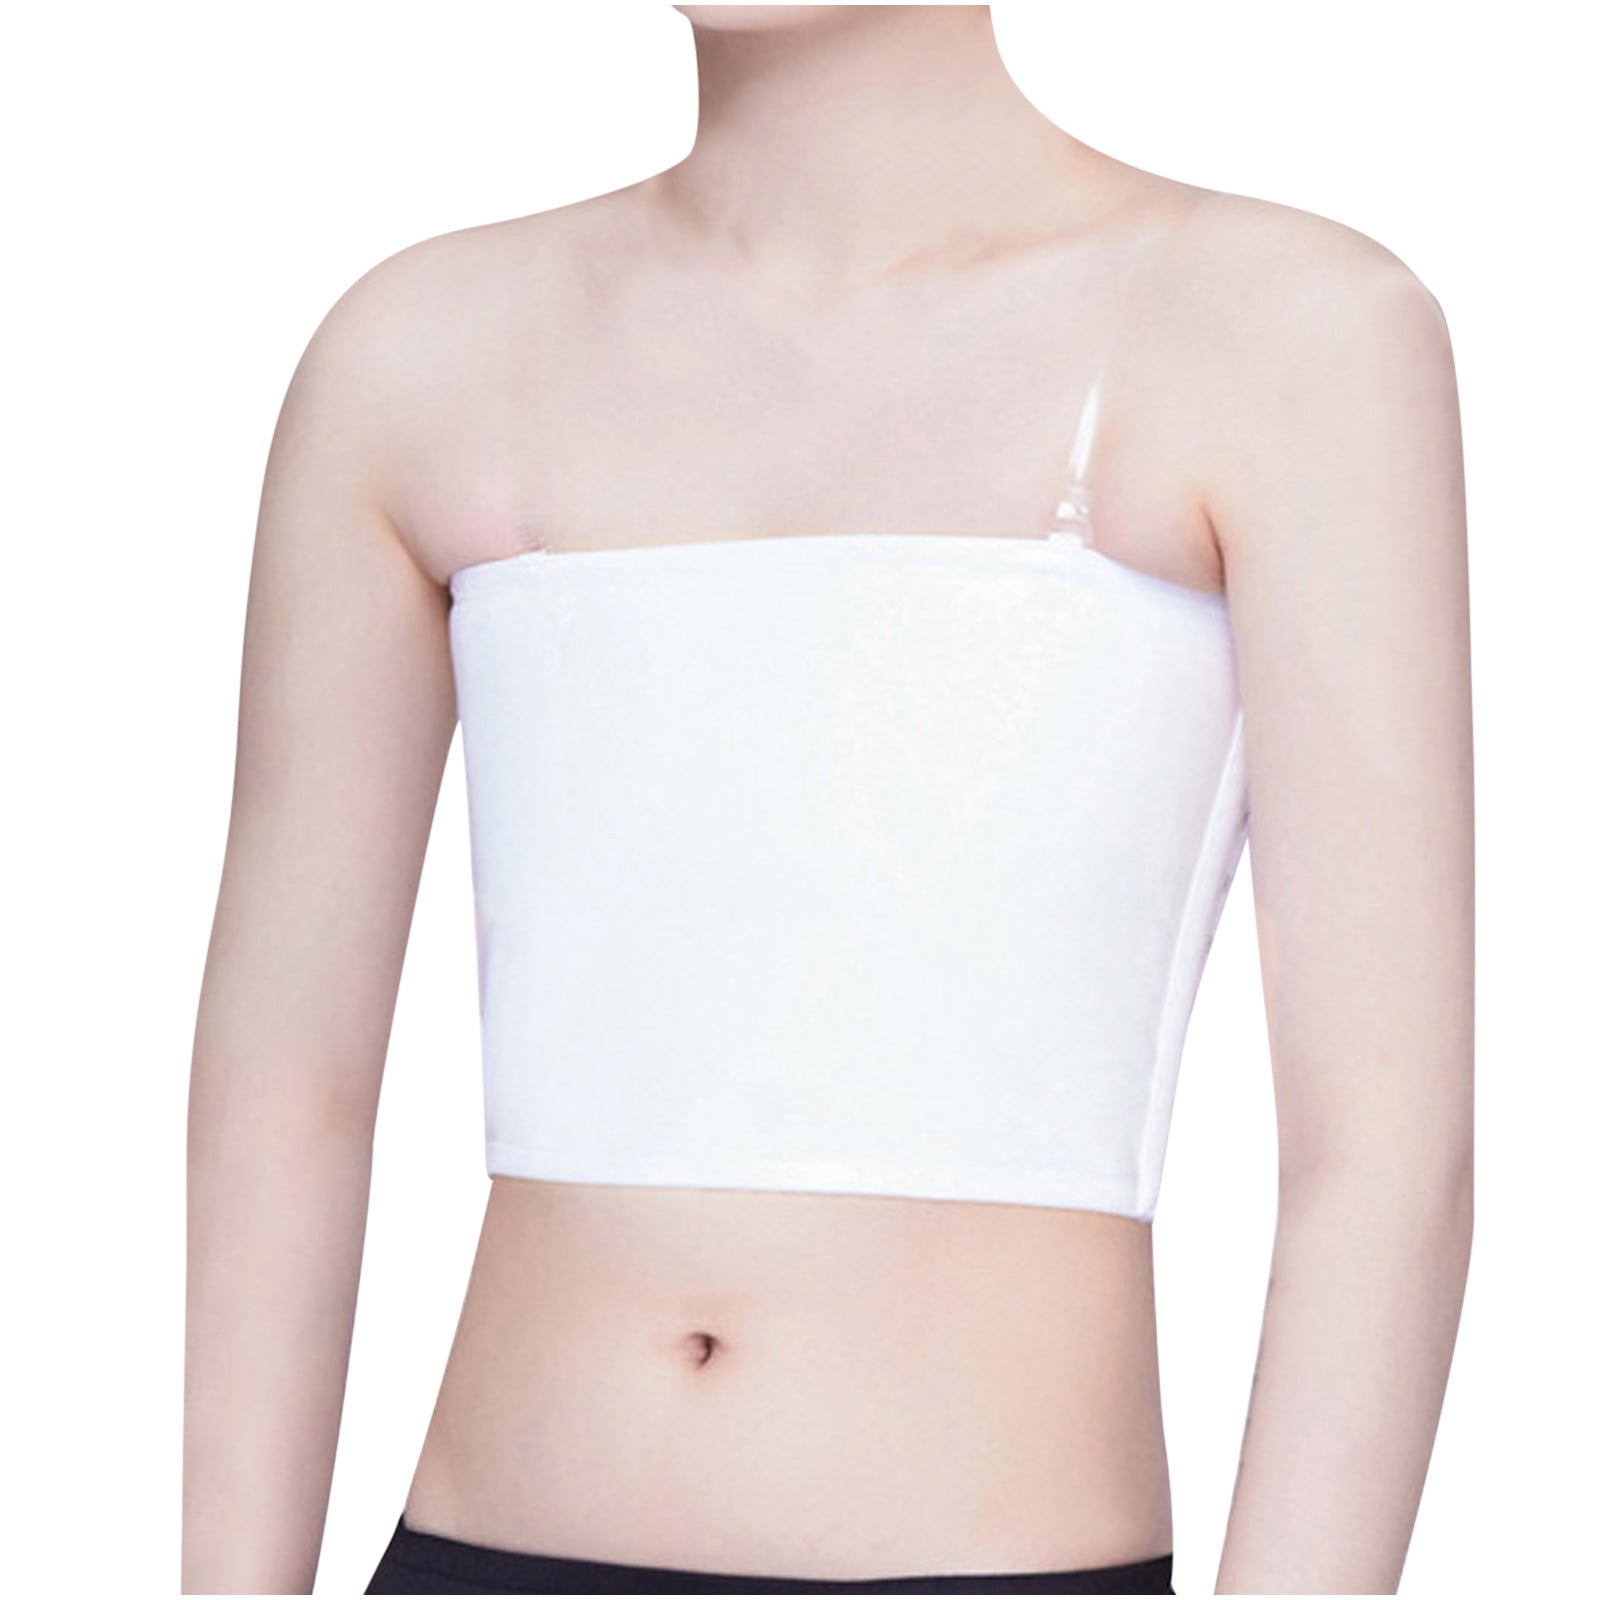 Compression Tube Top, Breast Binding